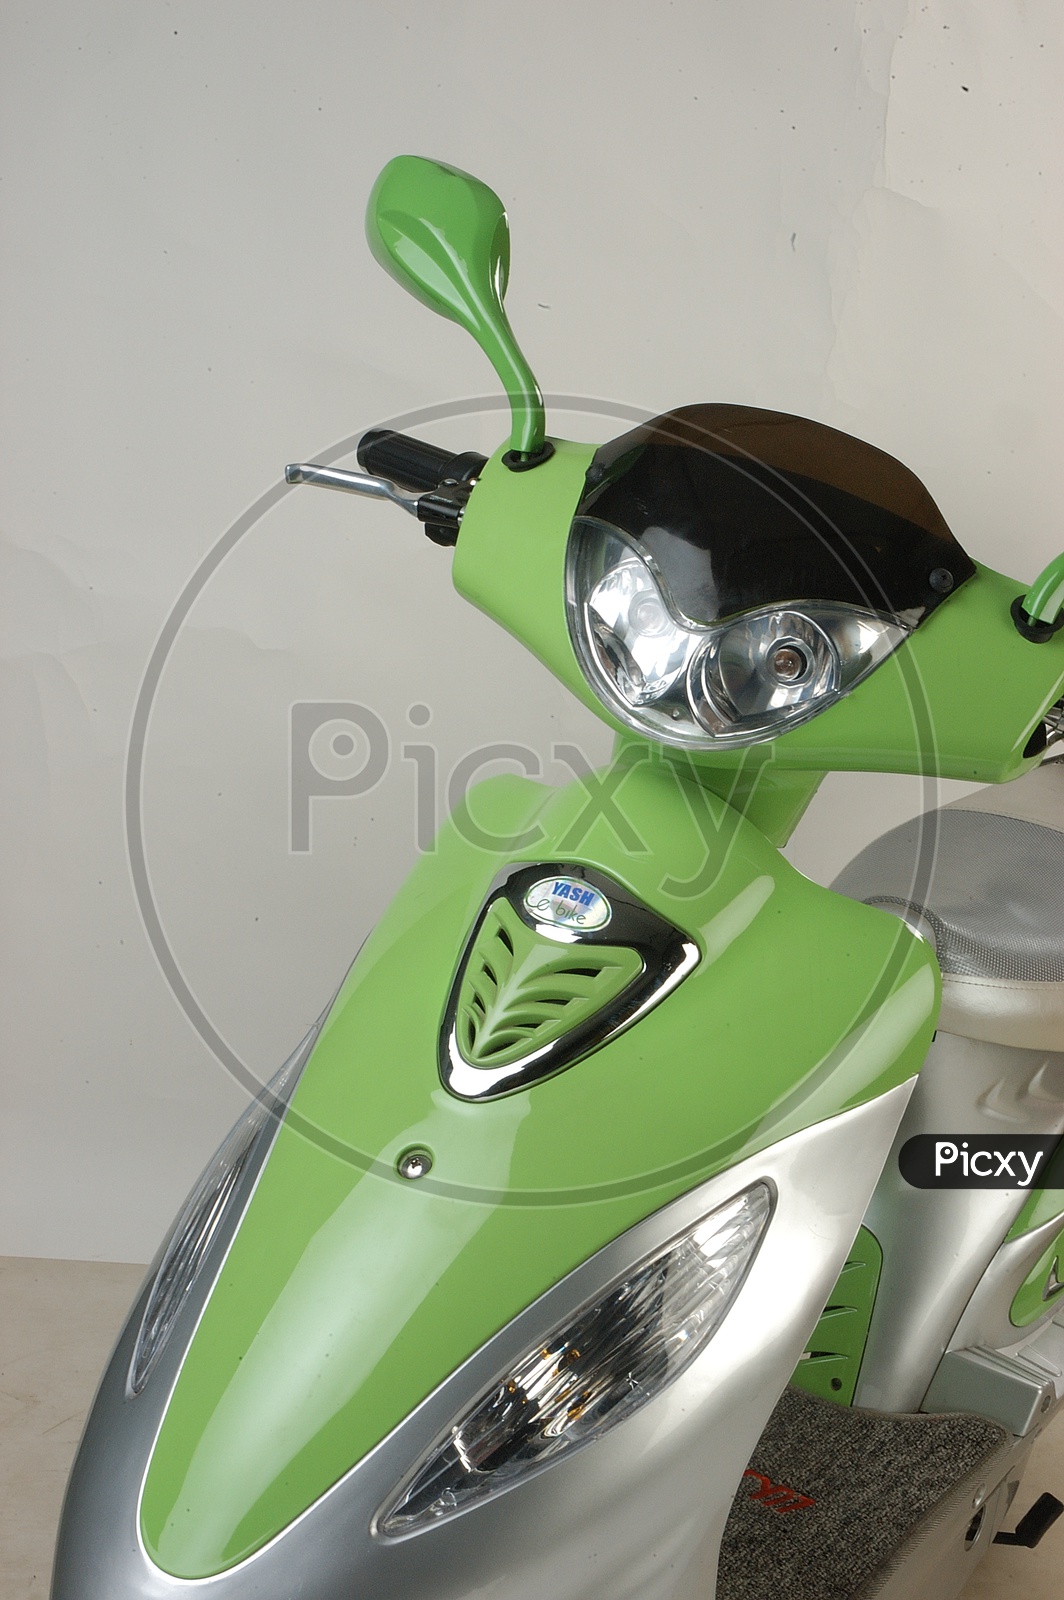 Head Light And Dome of a Scooty or Moped